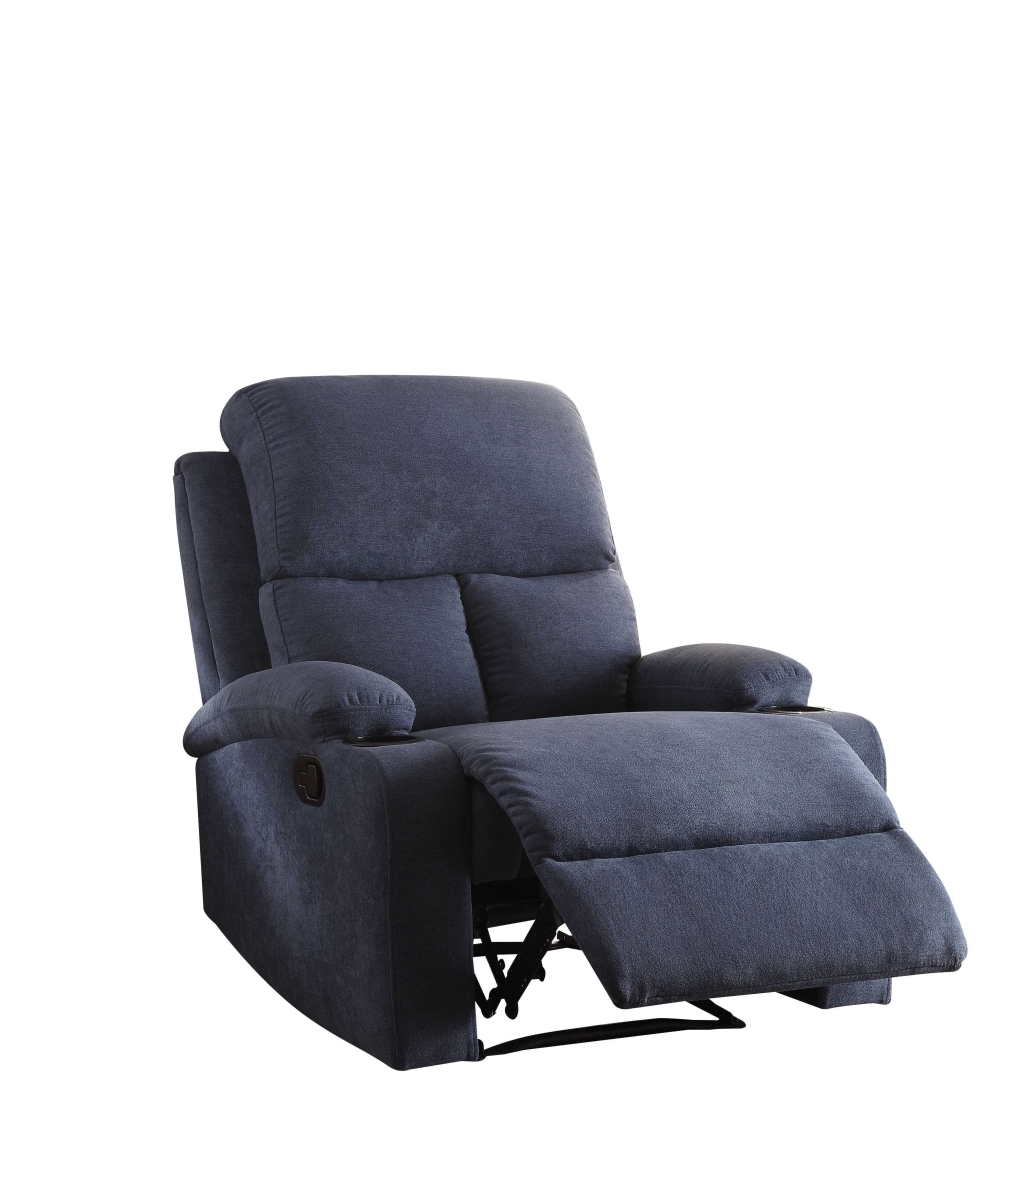 Home Roots Furniture 286181 39 X 32 X 37 In. Linen Fabric & Wood Frame Recliner - Blue